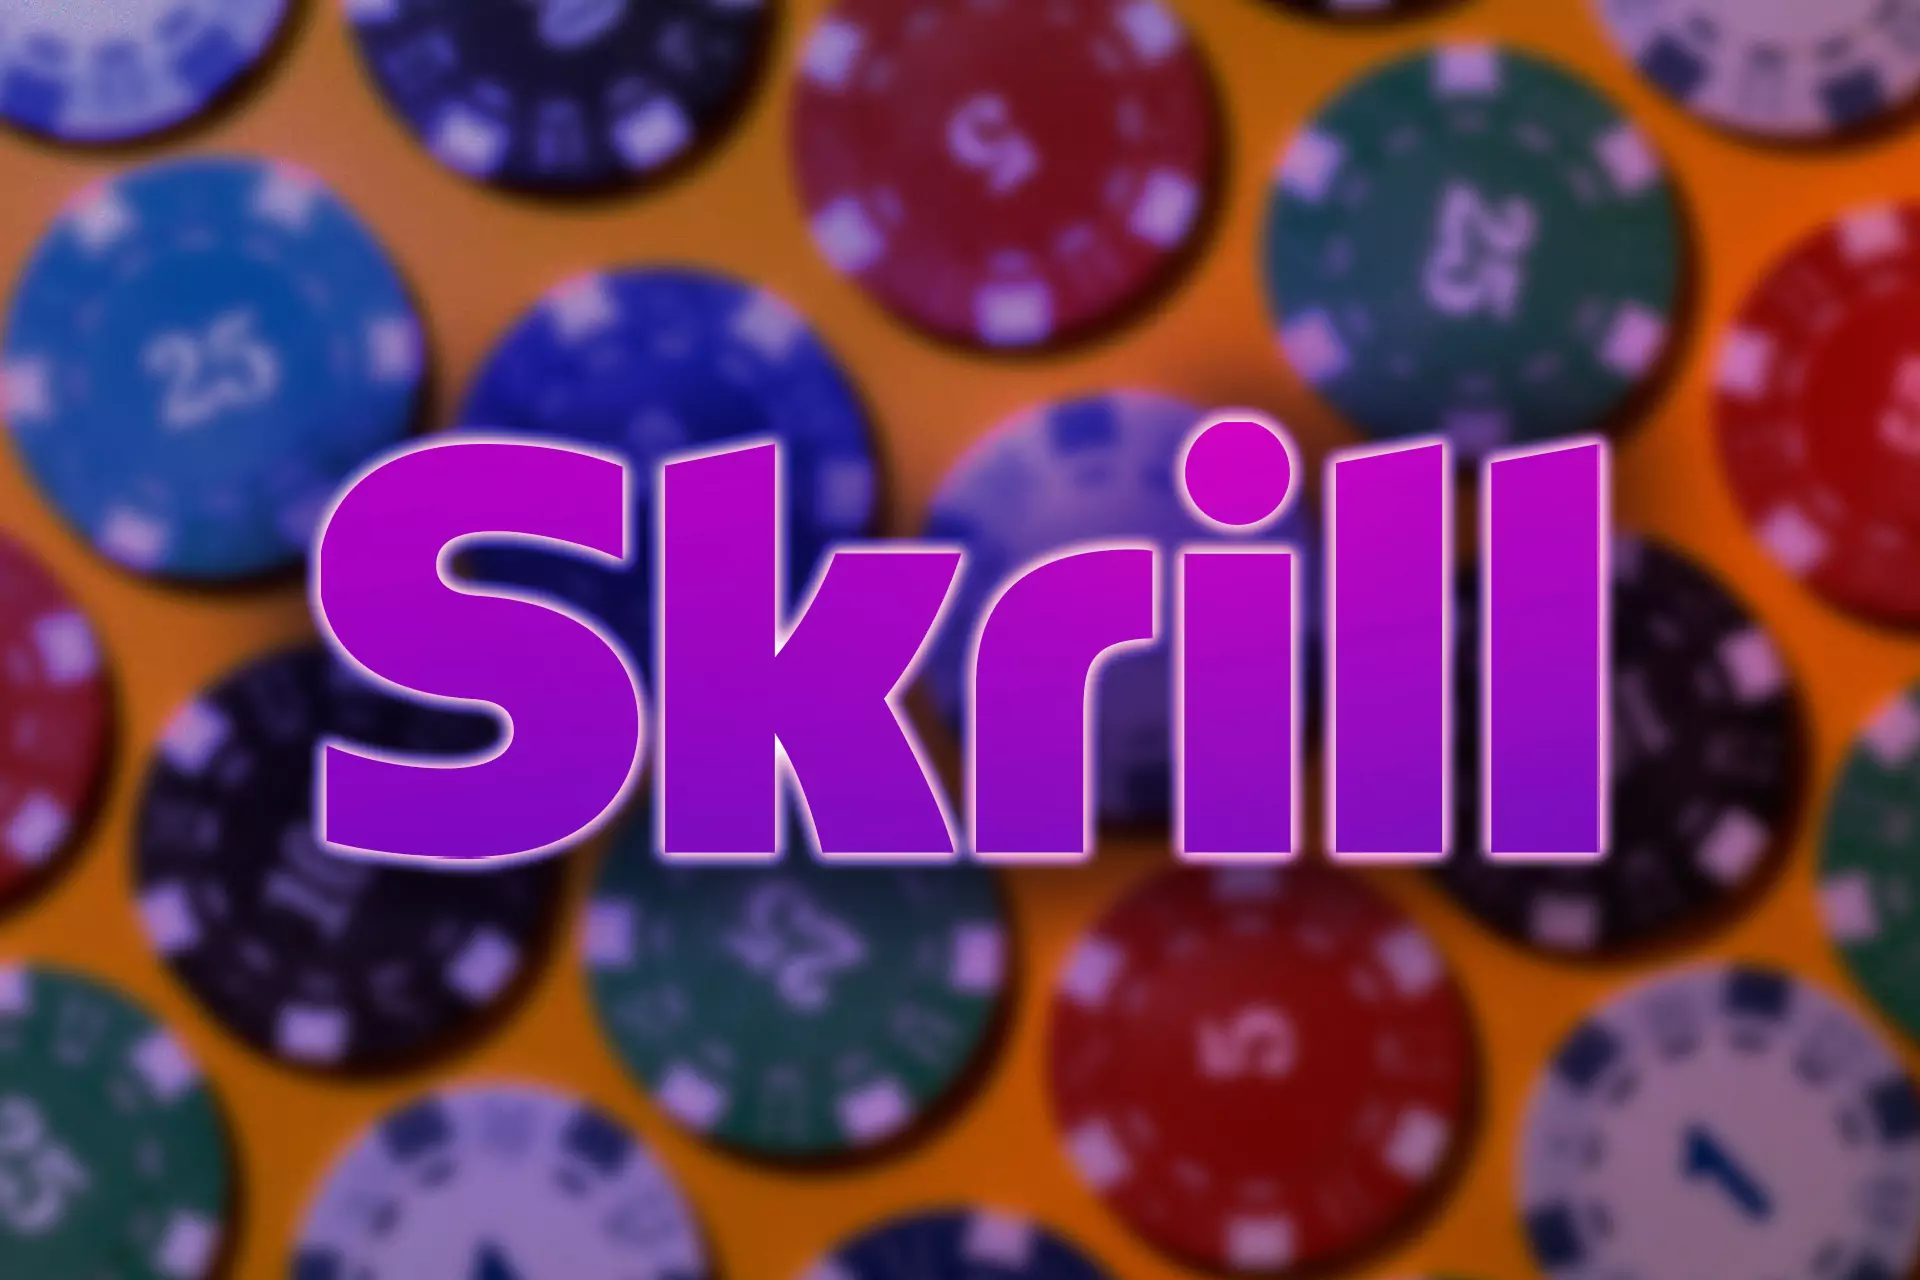 If you need to make lots of international transfers open an e-wallet at Skrill that is quite popular in the world.